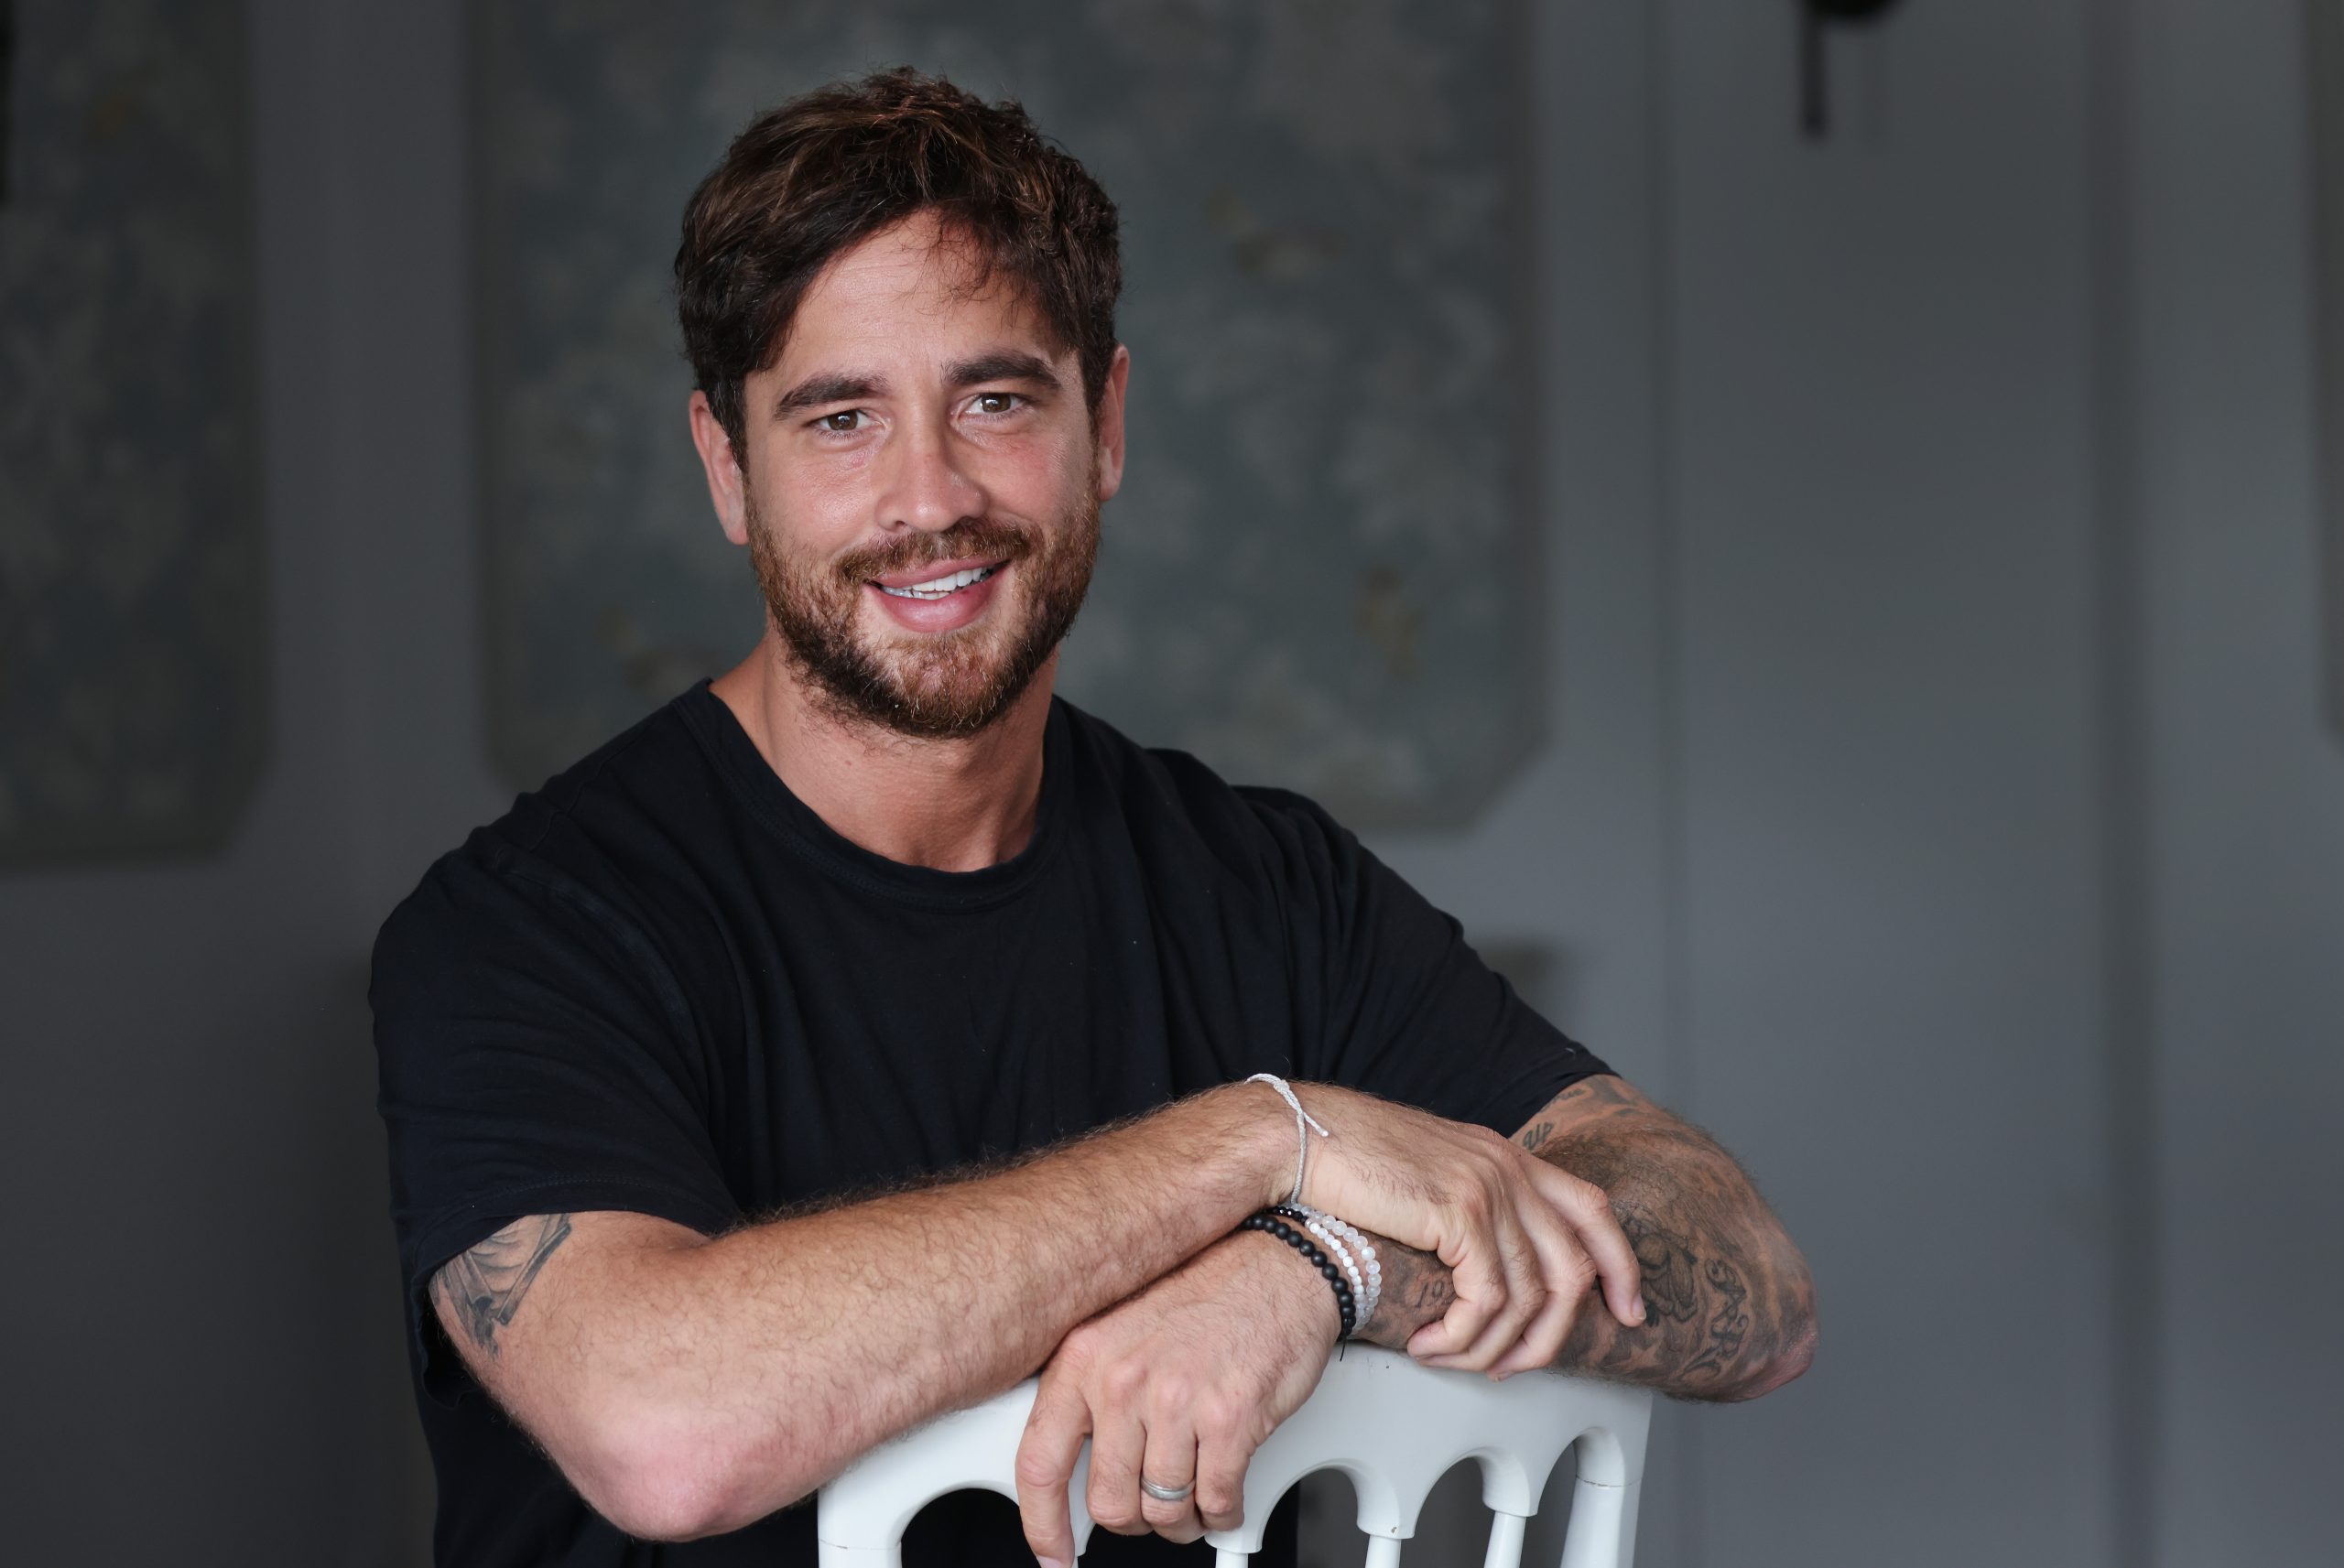 I needed sex like alcoholics need booze… I slept with pornstars, actresses & targeted married women, Danny Cipriani says